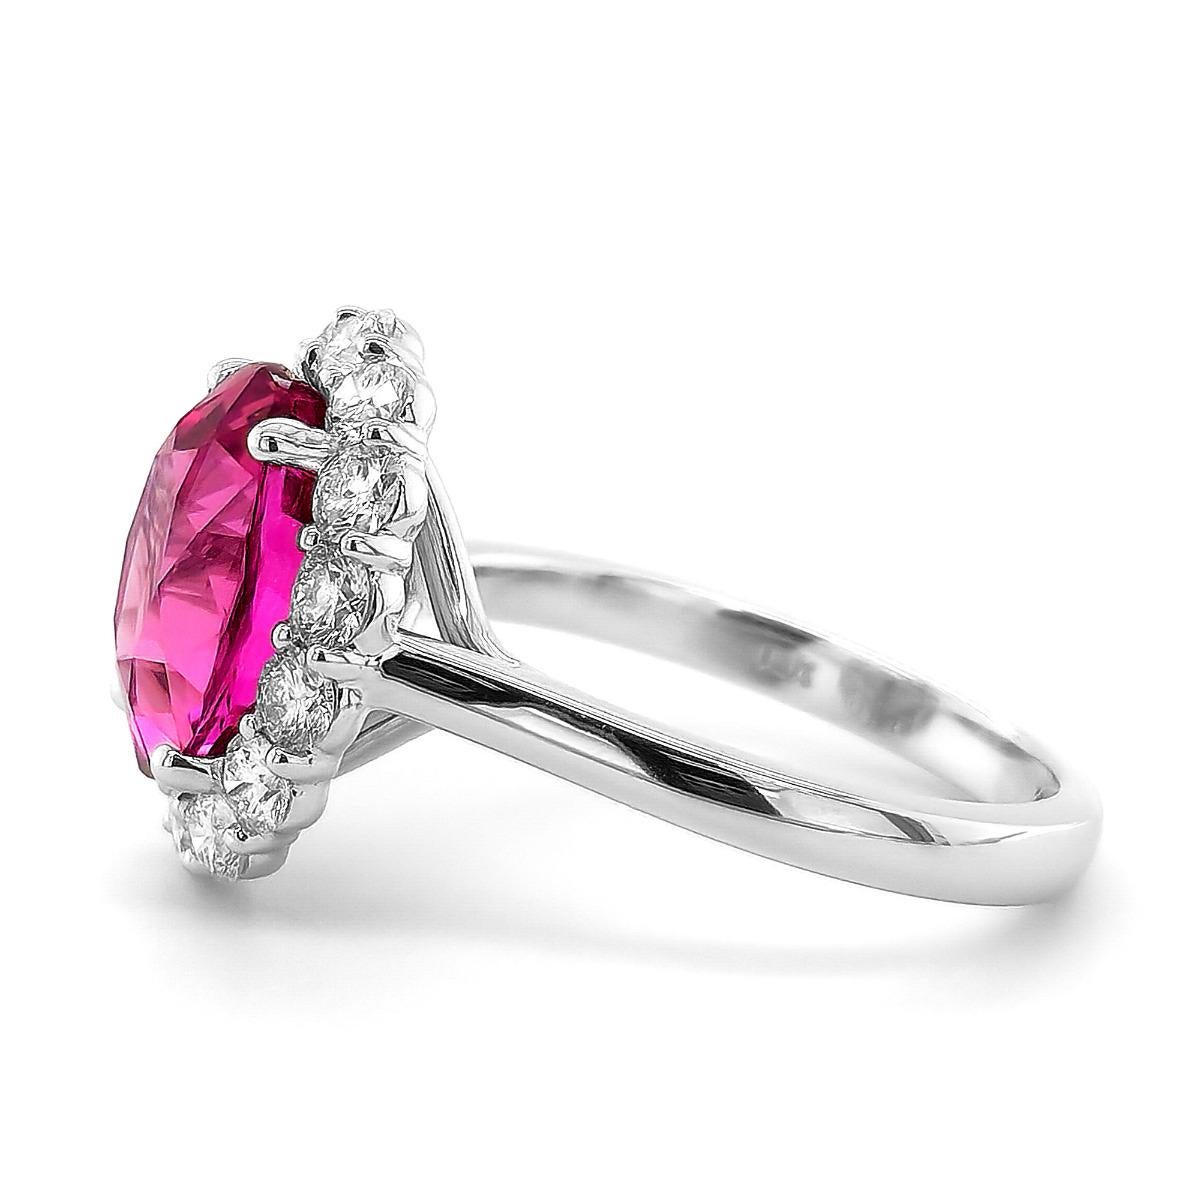 Brilliant Cut GIA Certified 5.34 Carat Madagascar Pink Sapphire Diamond 18k White Gold Ring For Sale